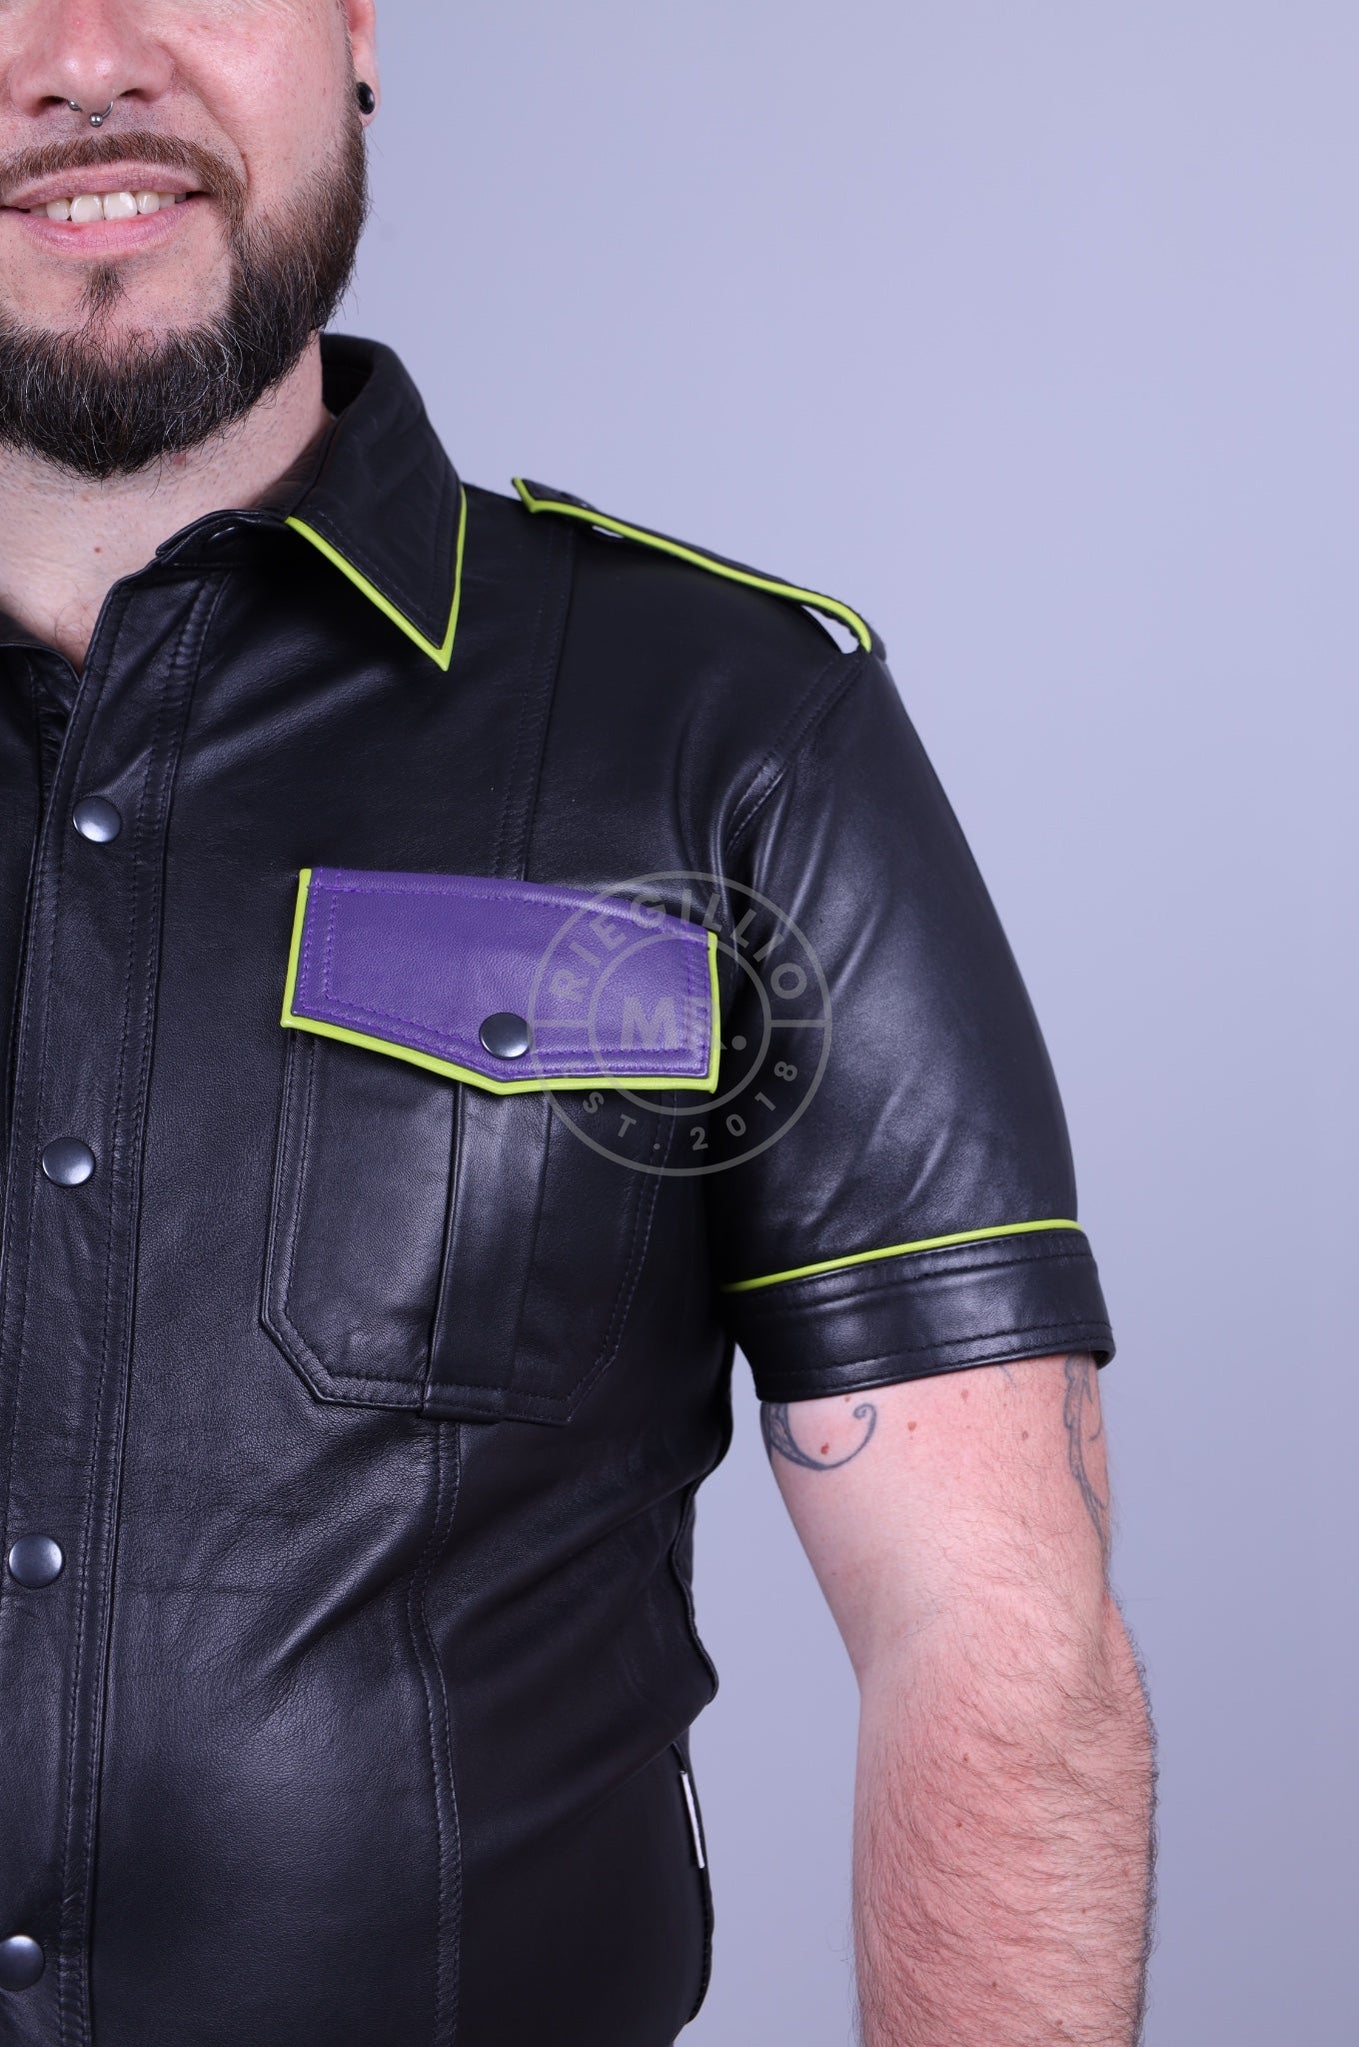 Black Leather Shirt - Lime Piping at MR. Riegillio